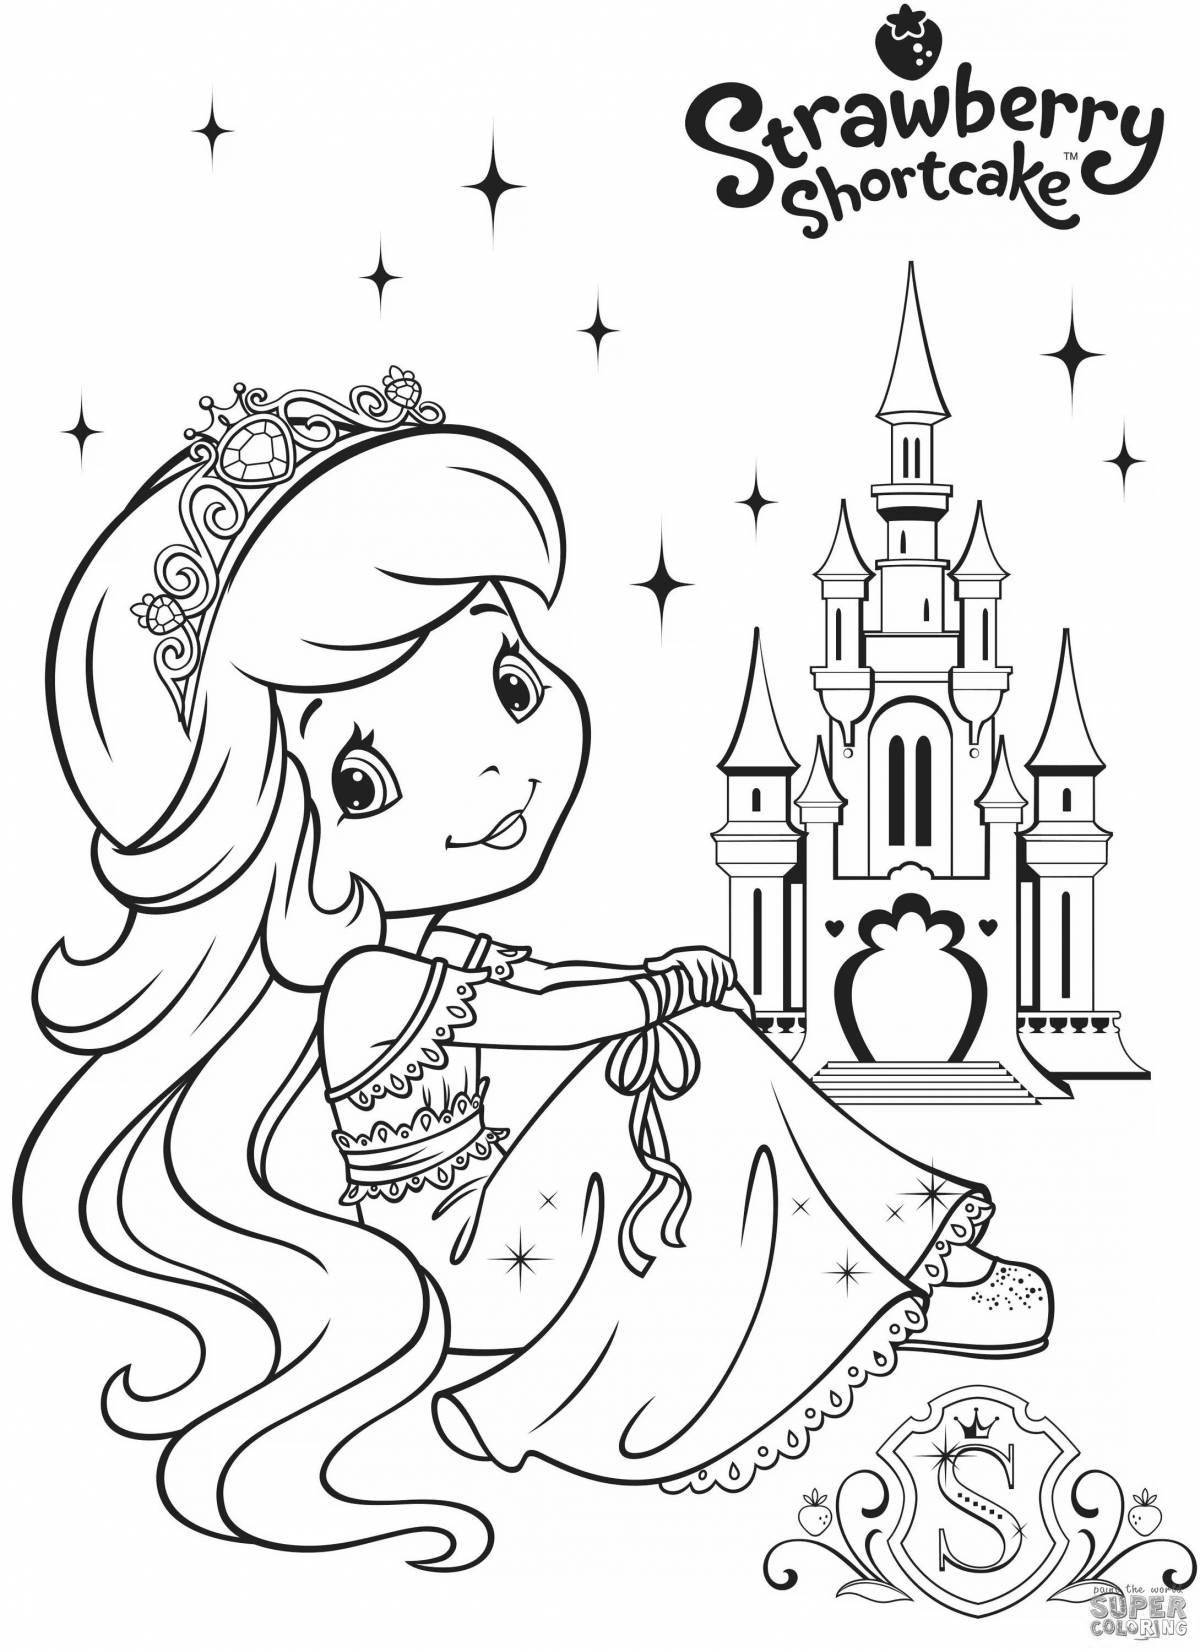 Castle sublime coloring page for girls